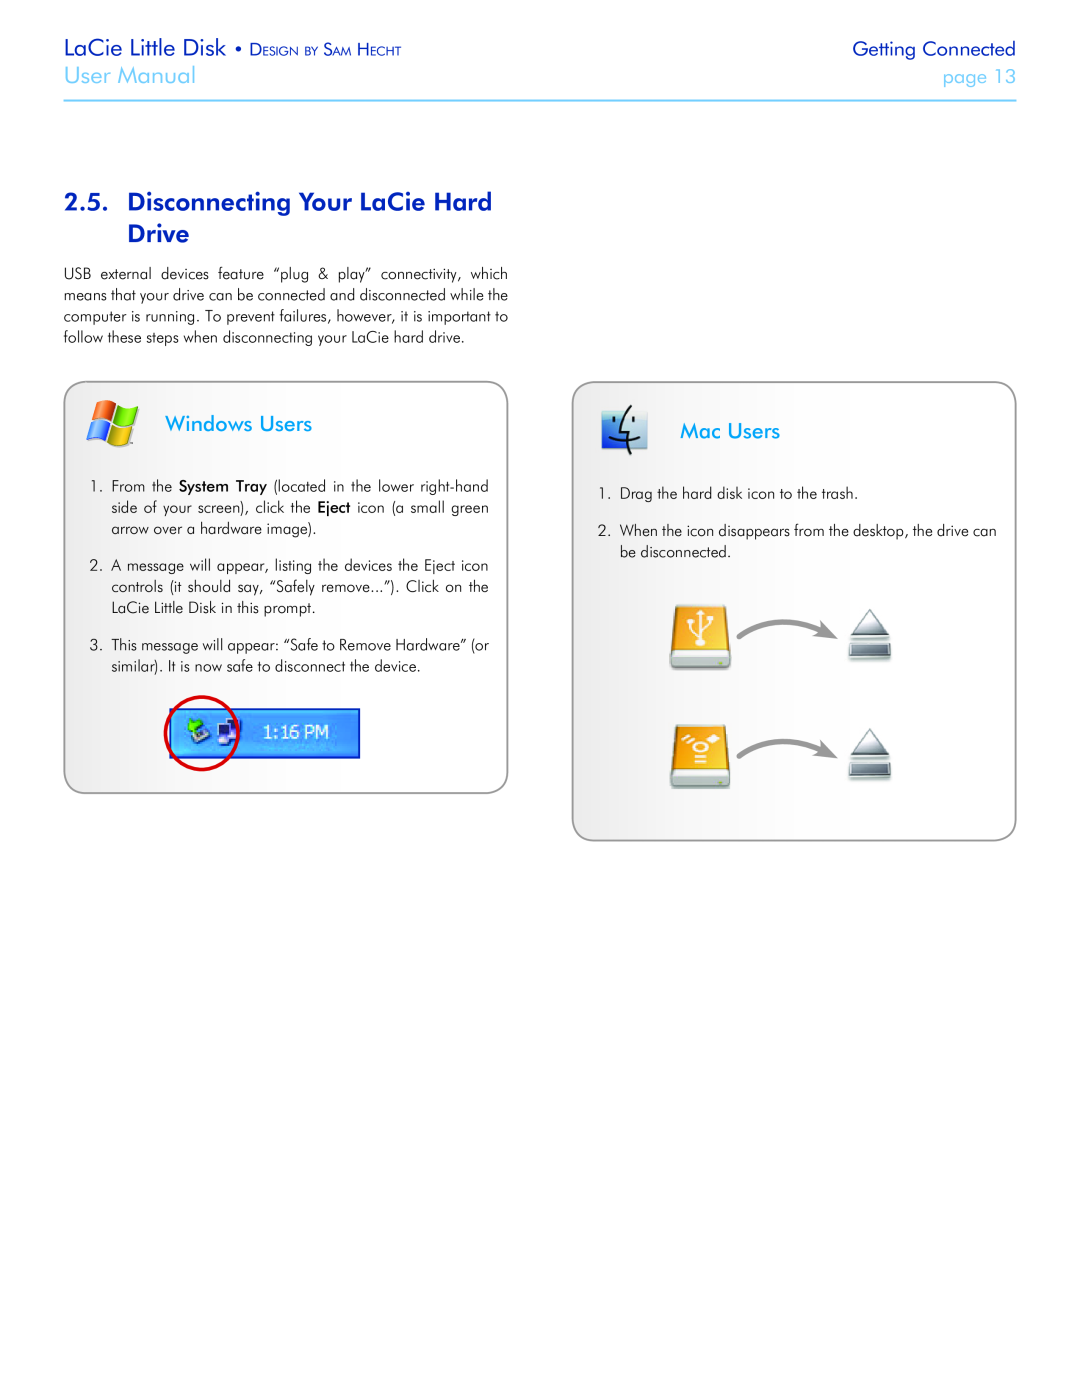 LaCie Little Big Disk Disconnecting Your LaCie Hard Drive, Windows Users, Mac Users, LaCie Little Disk Design by Sam Hecht 